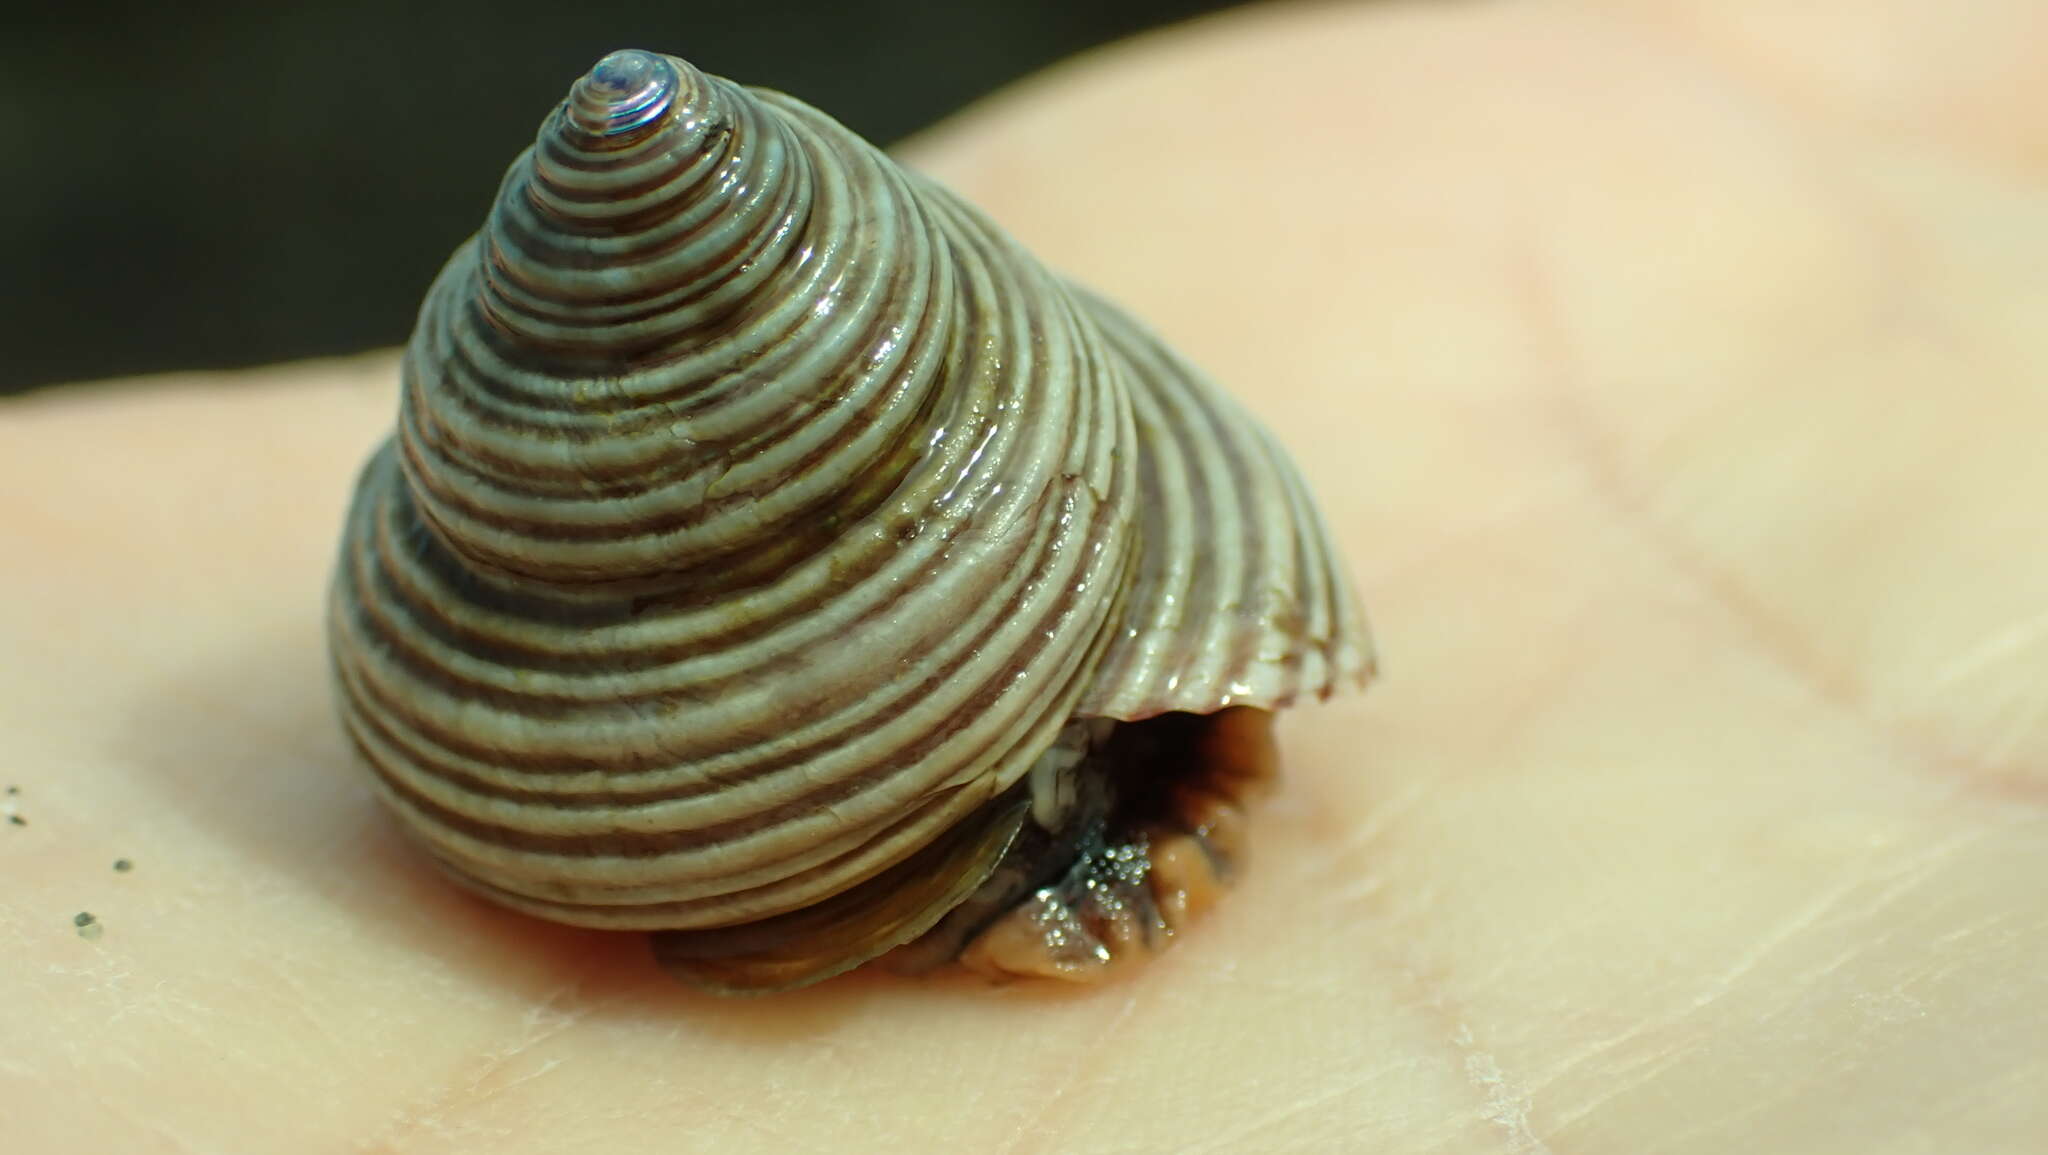 Image of Blue Top Snail